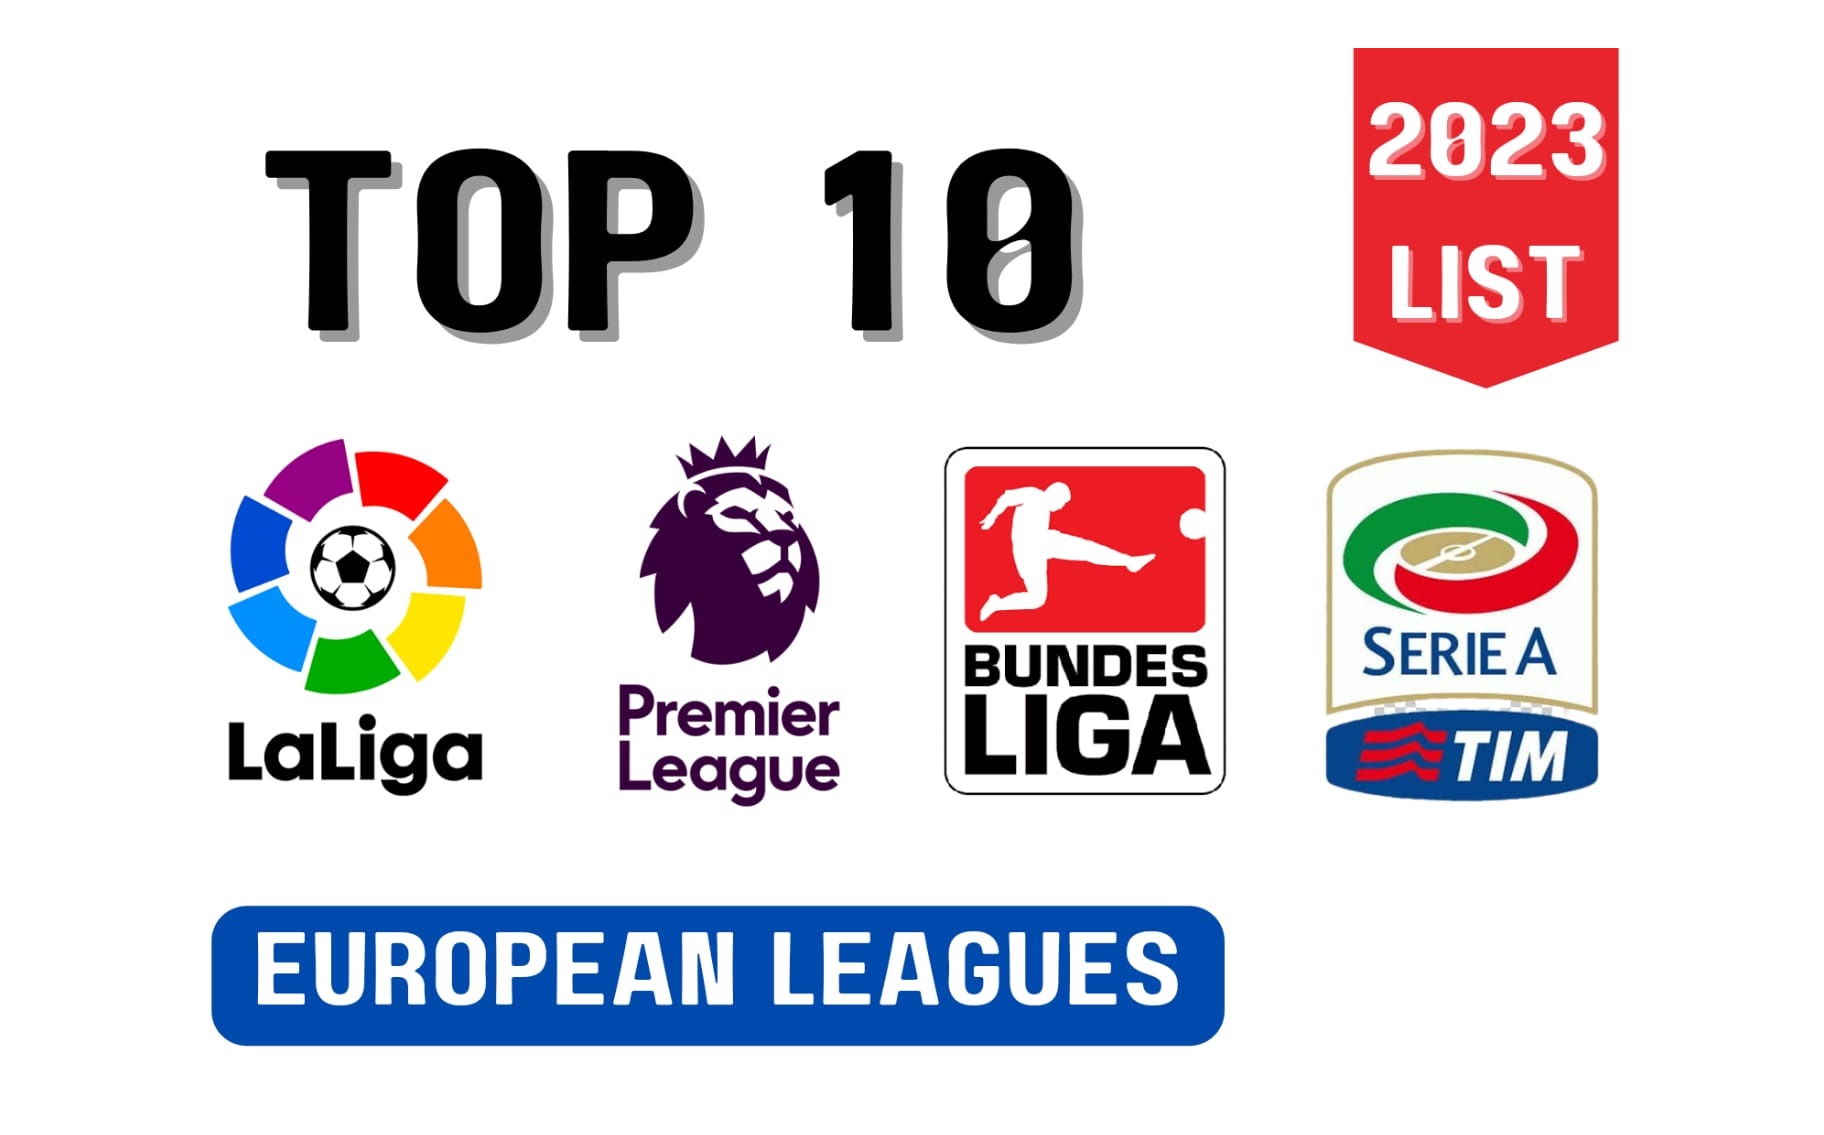 The 10 highest-rated players in Europe's top five leagues this season have  been revealed